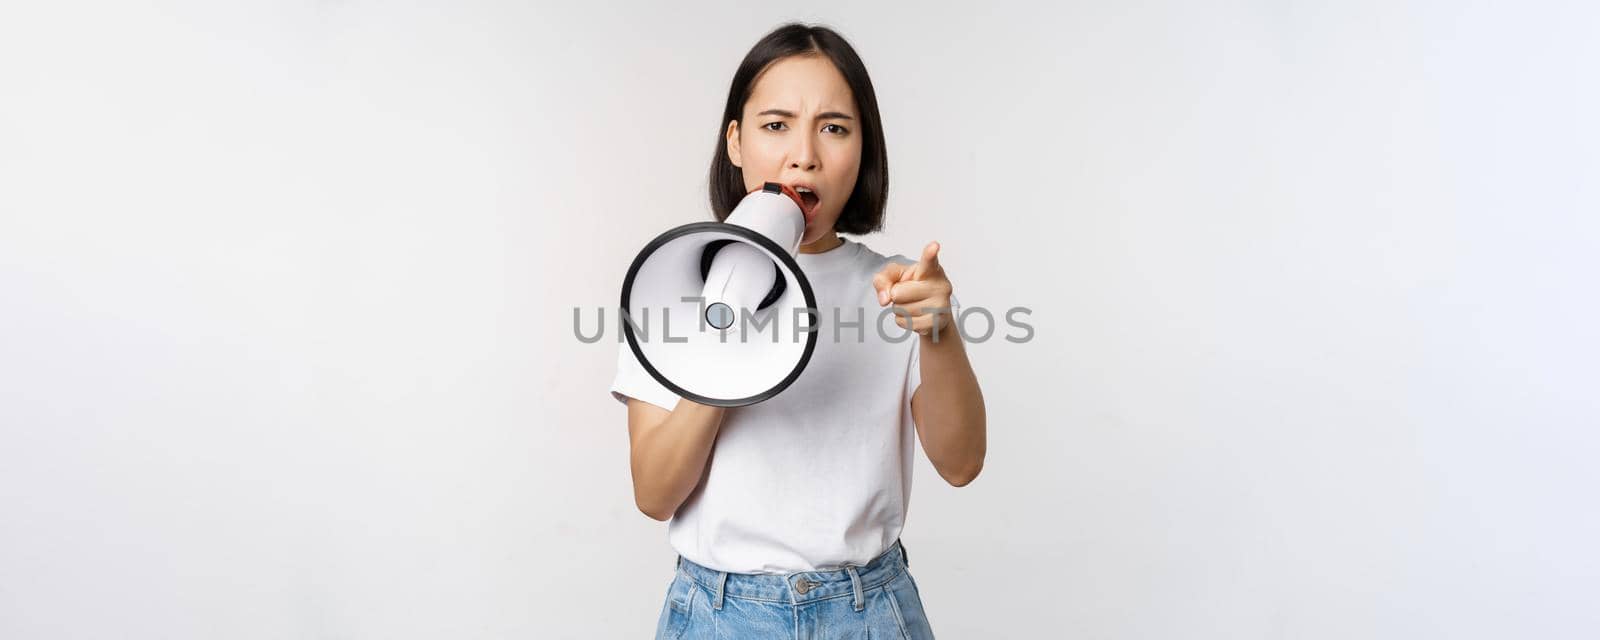 Angry asian woman with megaphone, scolding, accusing someone, protesting with speakerphone on protest, standing over white background.